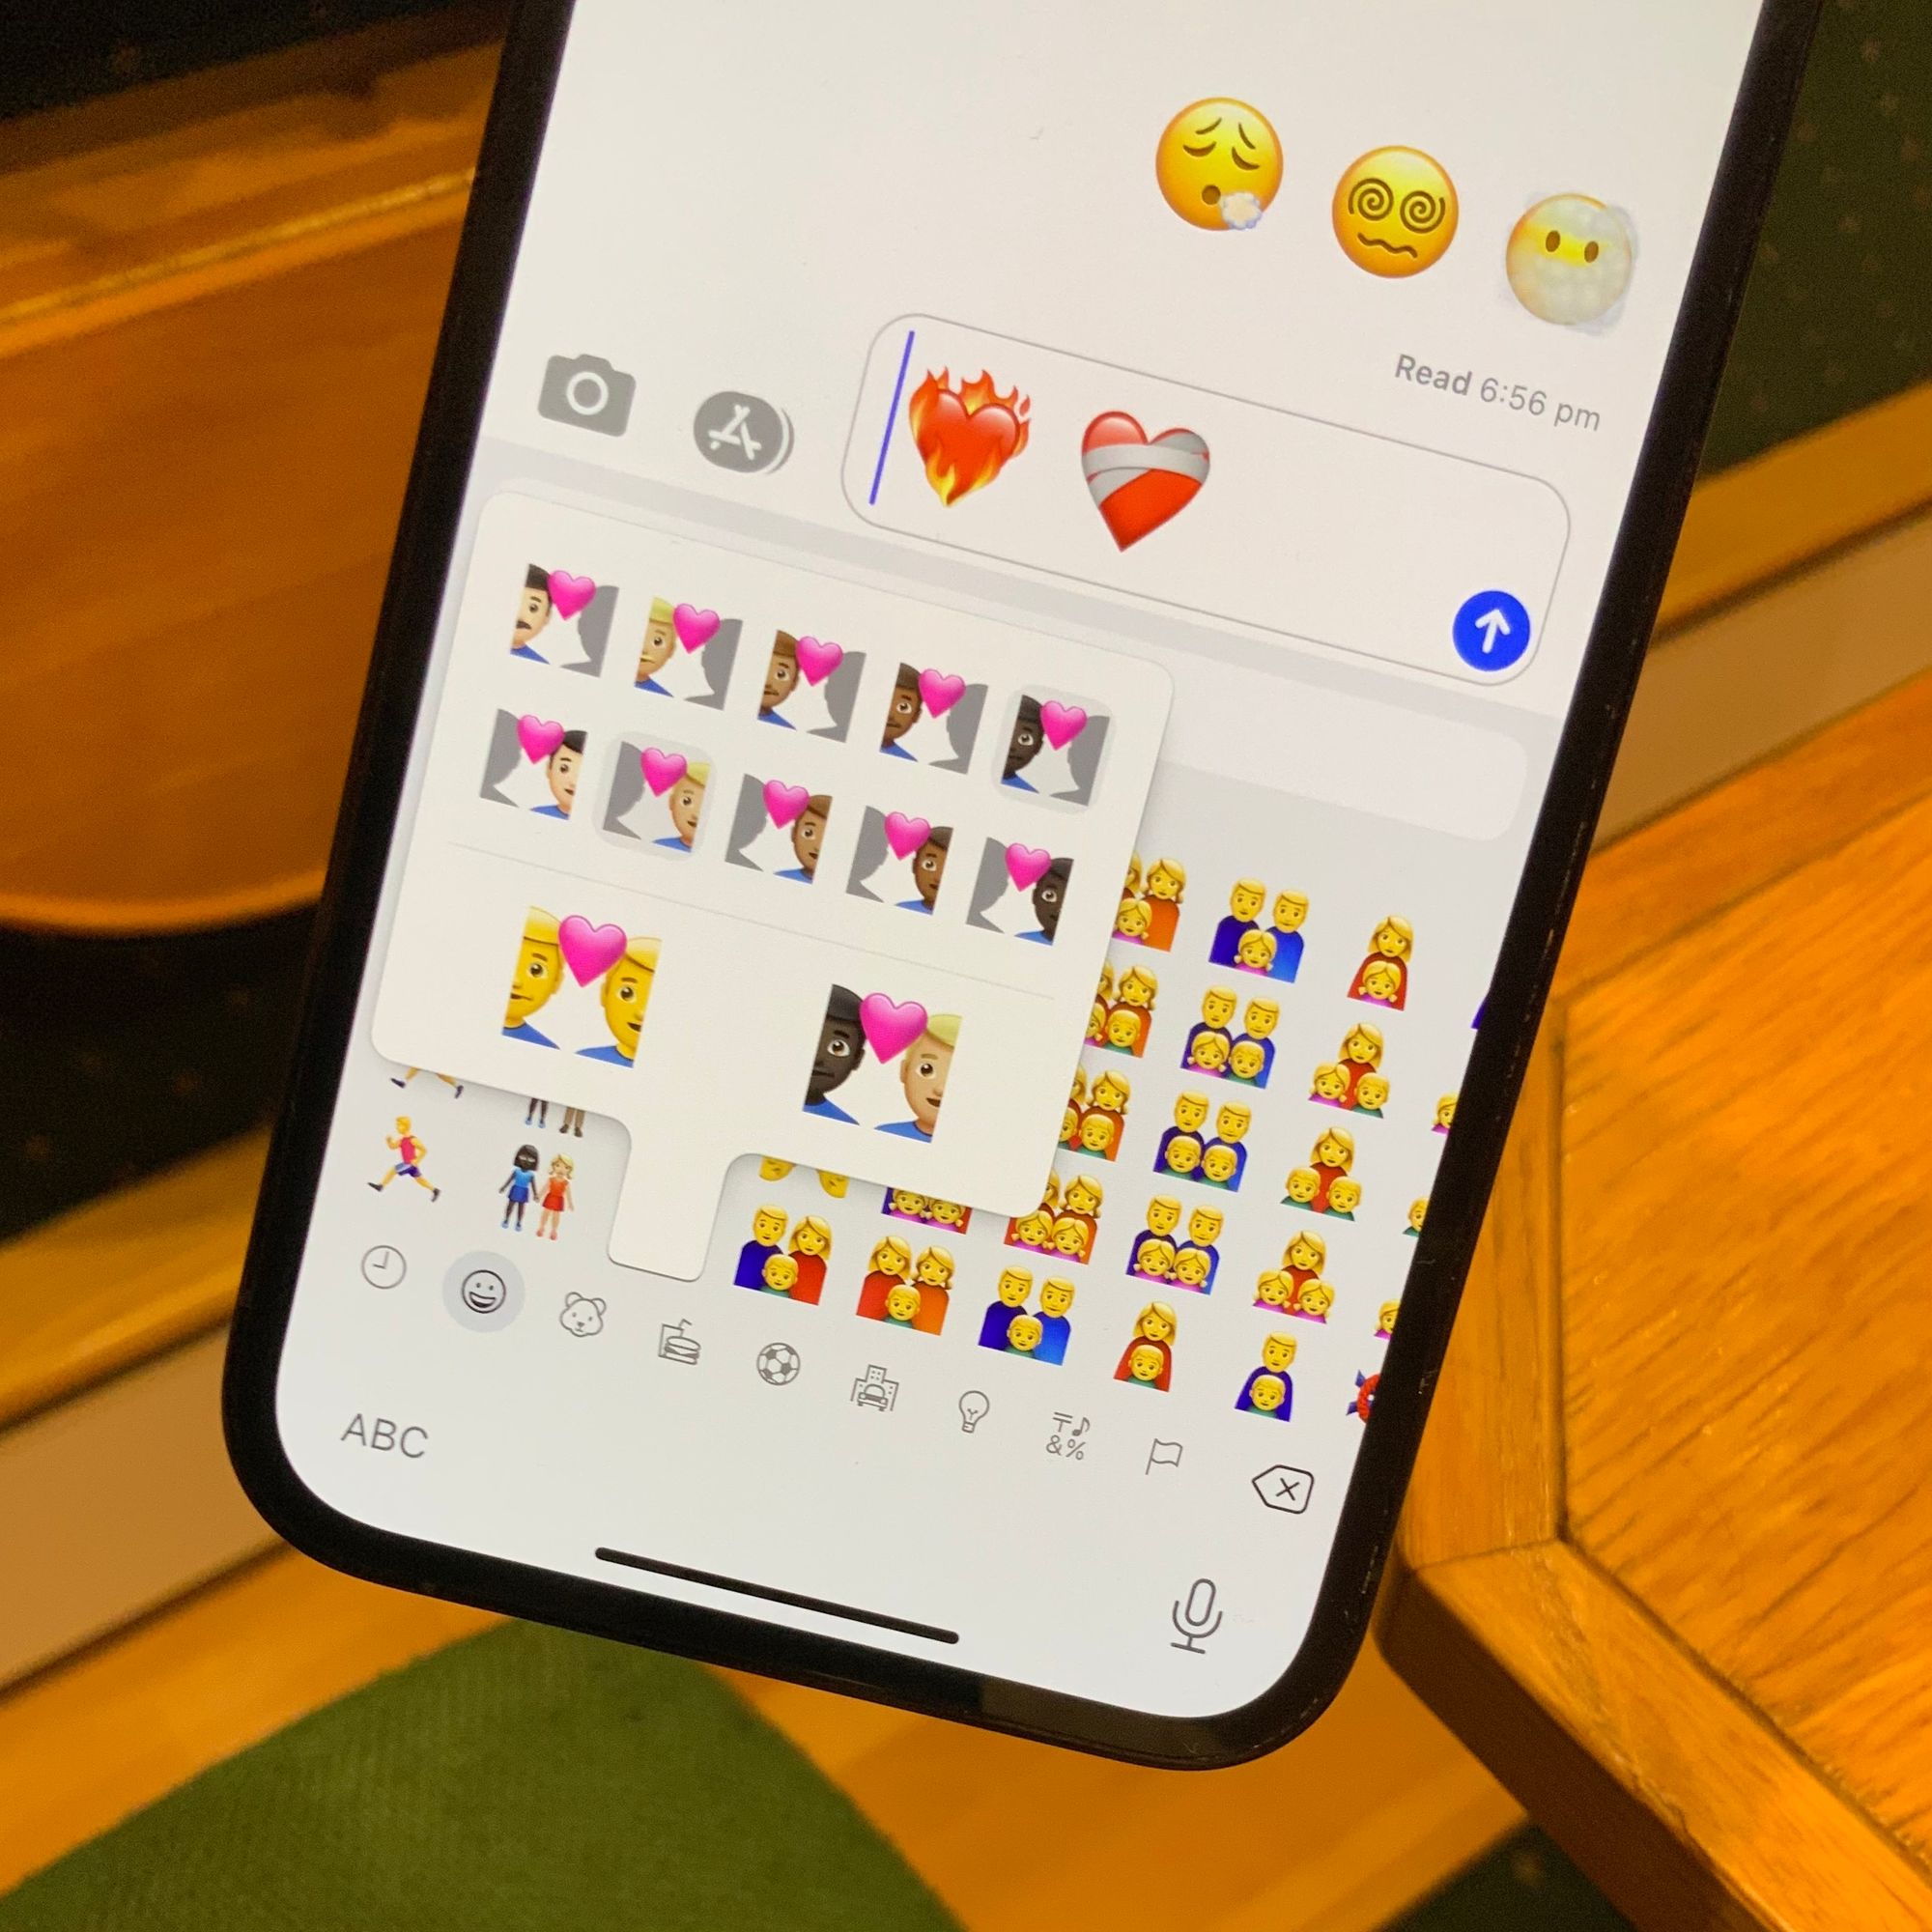 iOS 14.5 is here: What%27s new in this update?